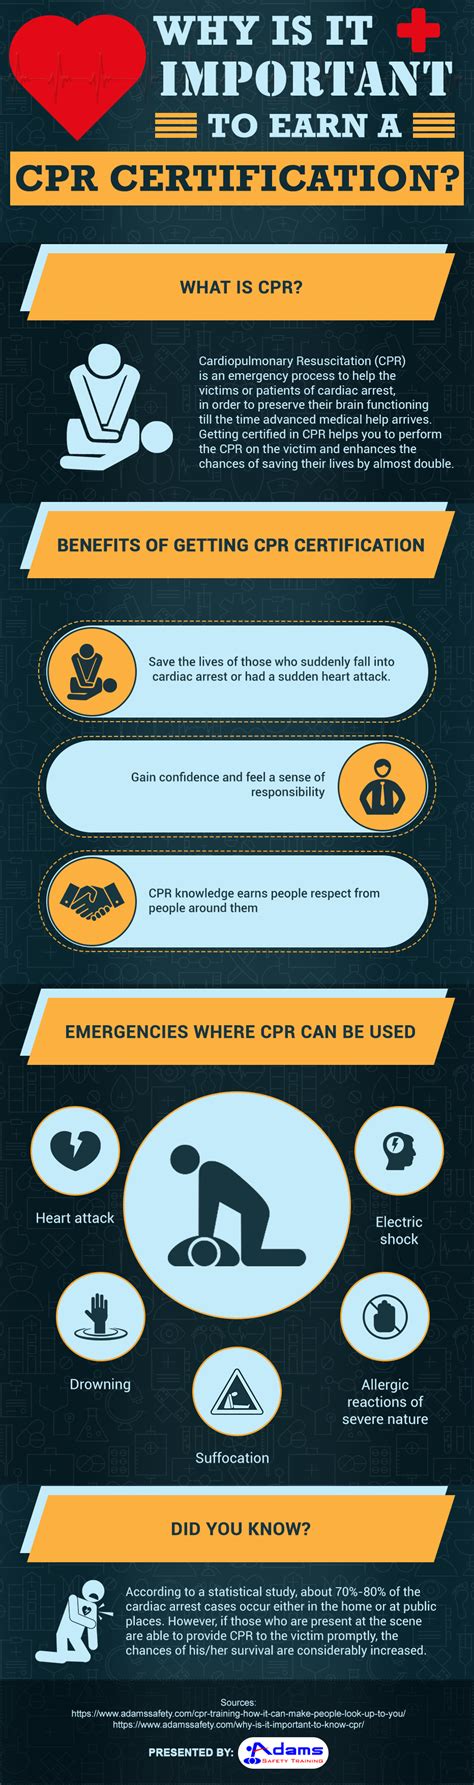 Earning Cpr Certification: 6 Steps & Advantages